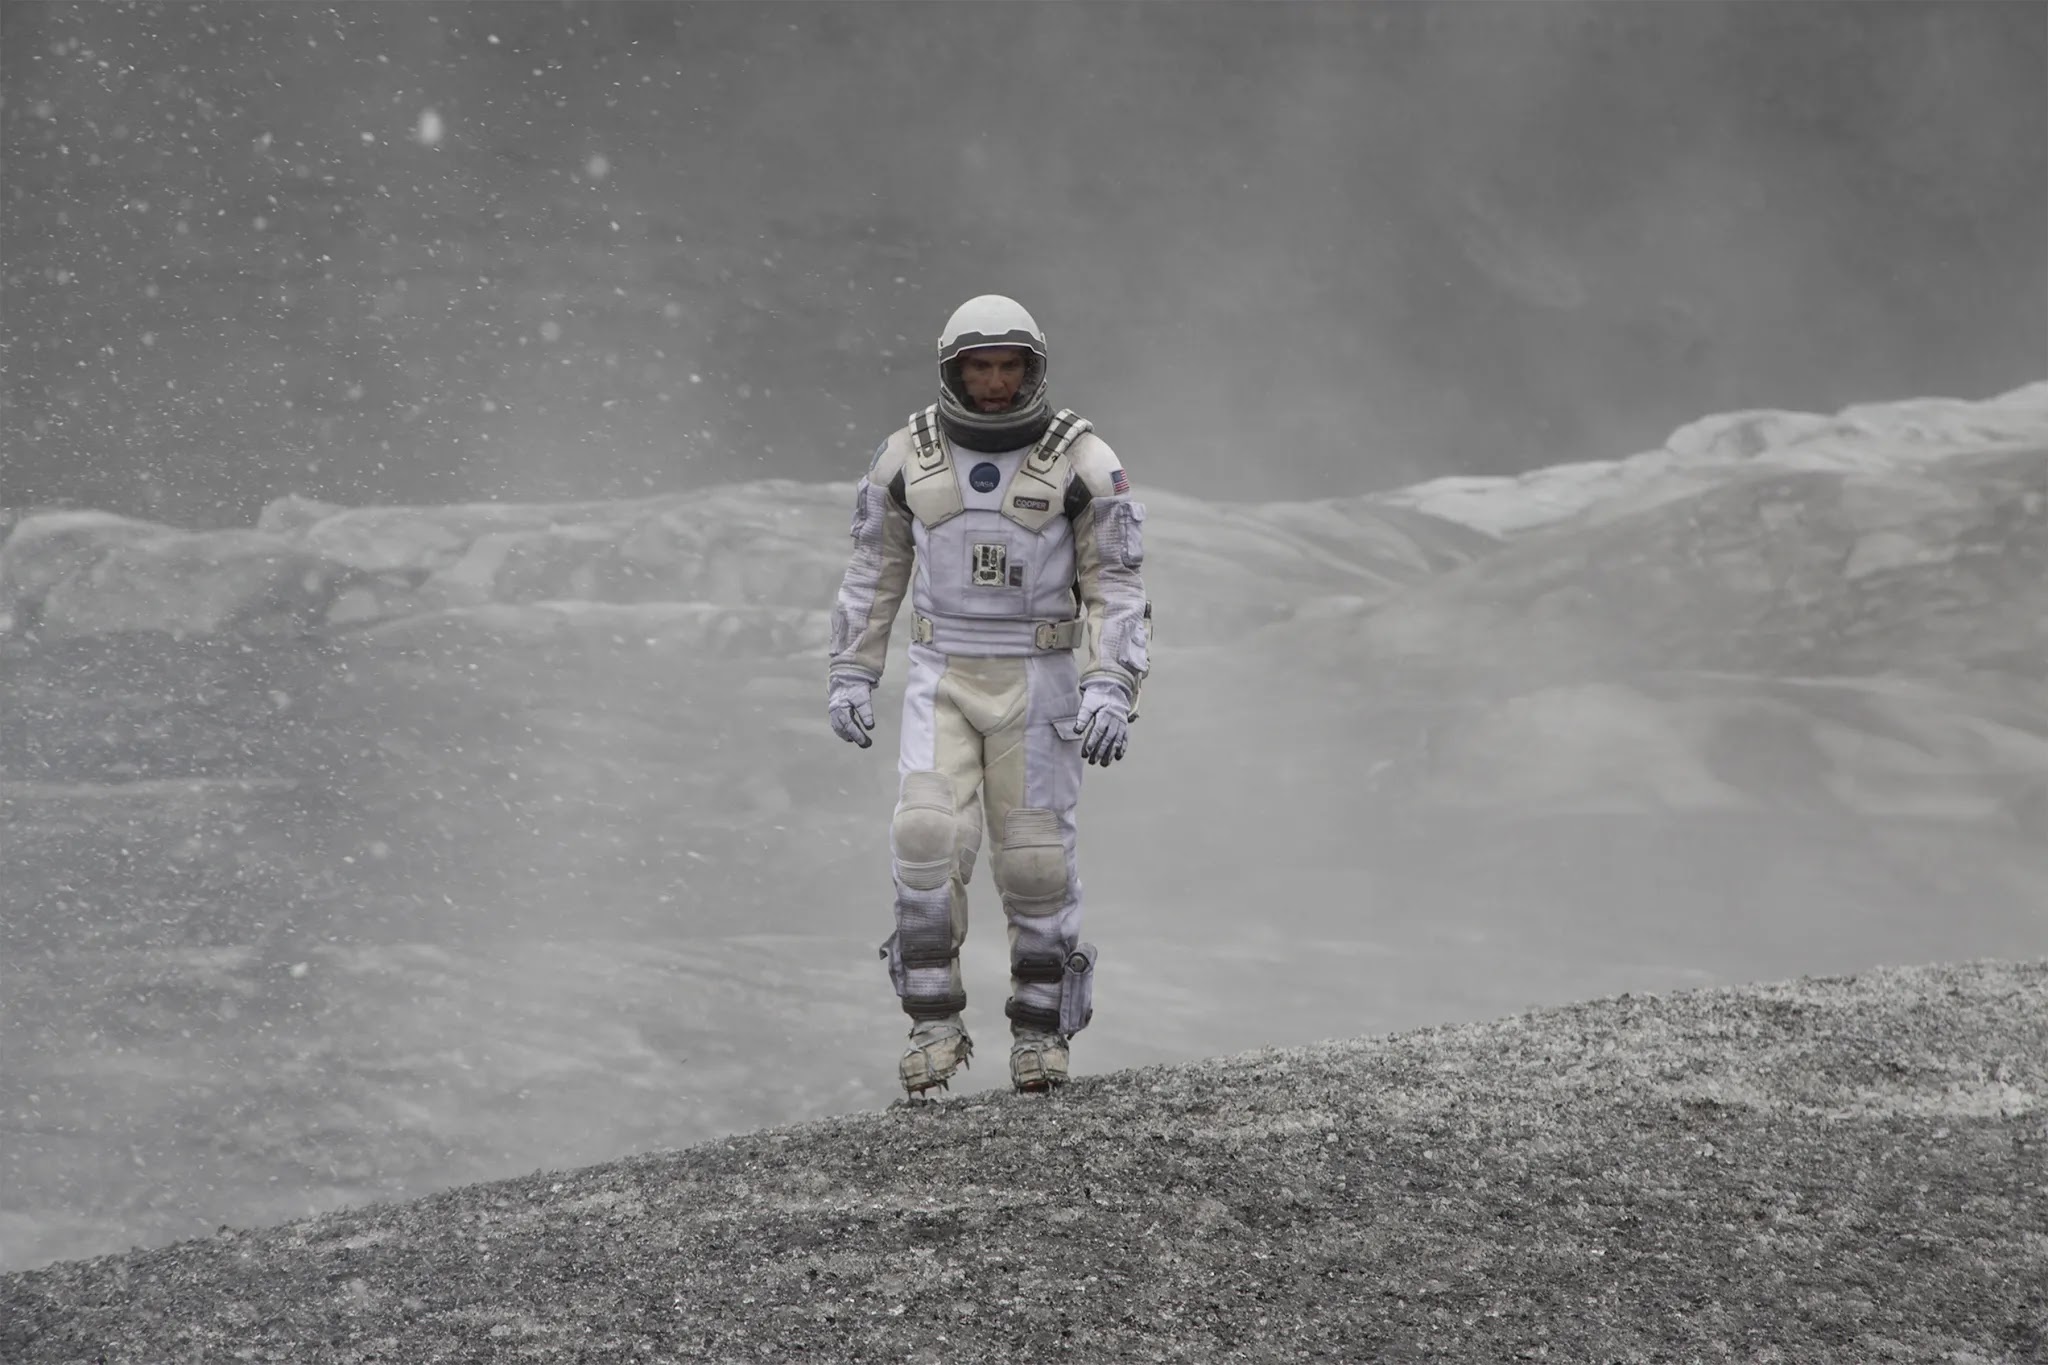 interstellar - 5 Futuristic Sci-Fi Space Suits That Will Take You to New Worlds